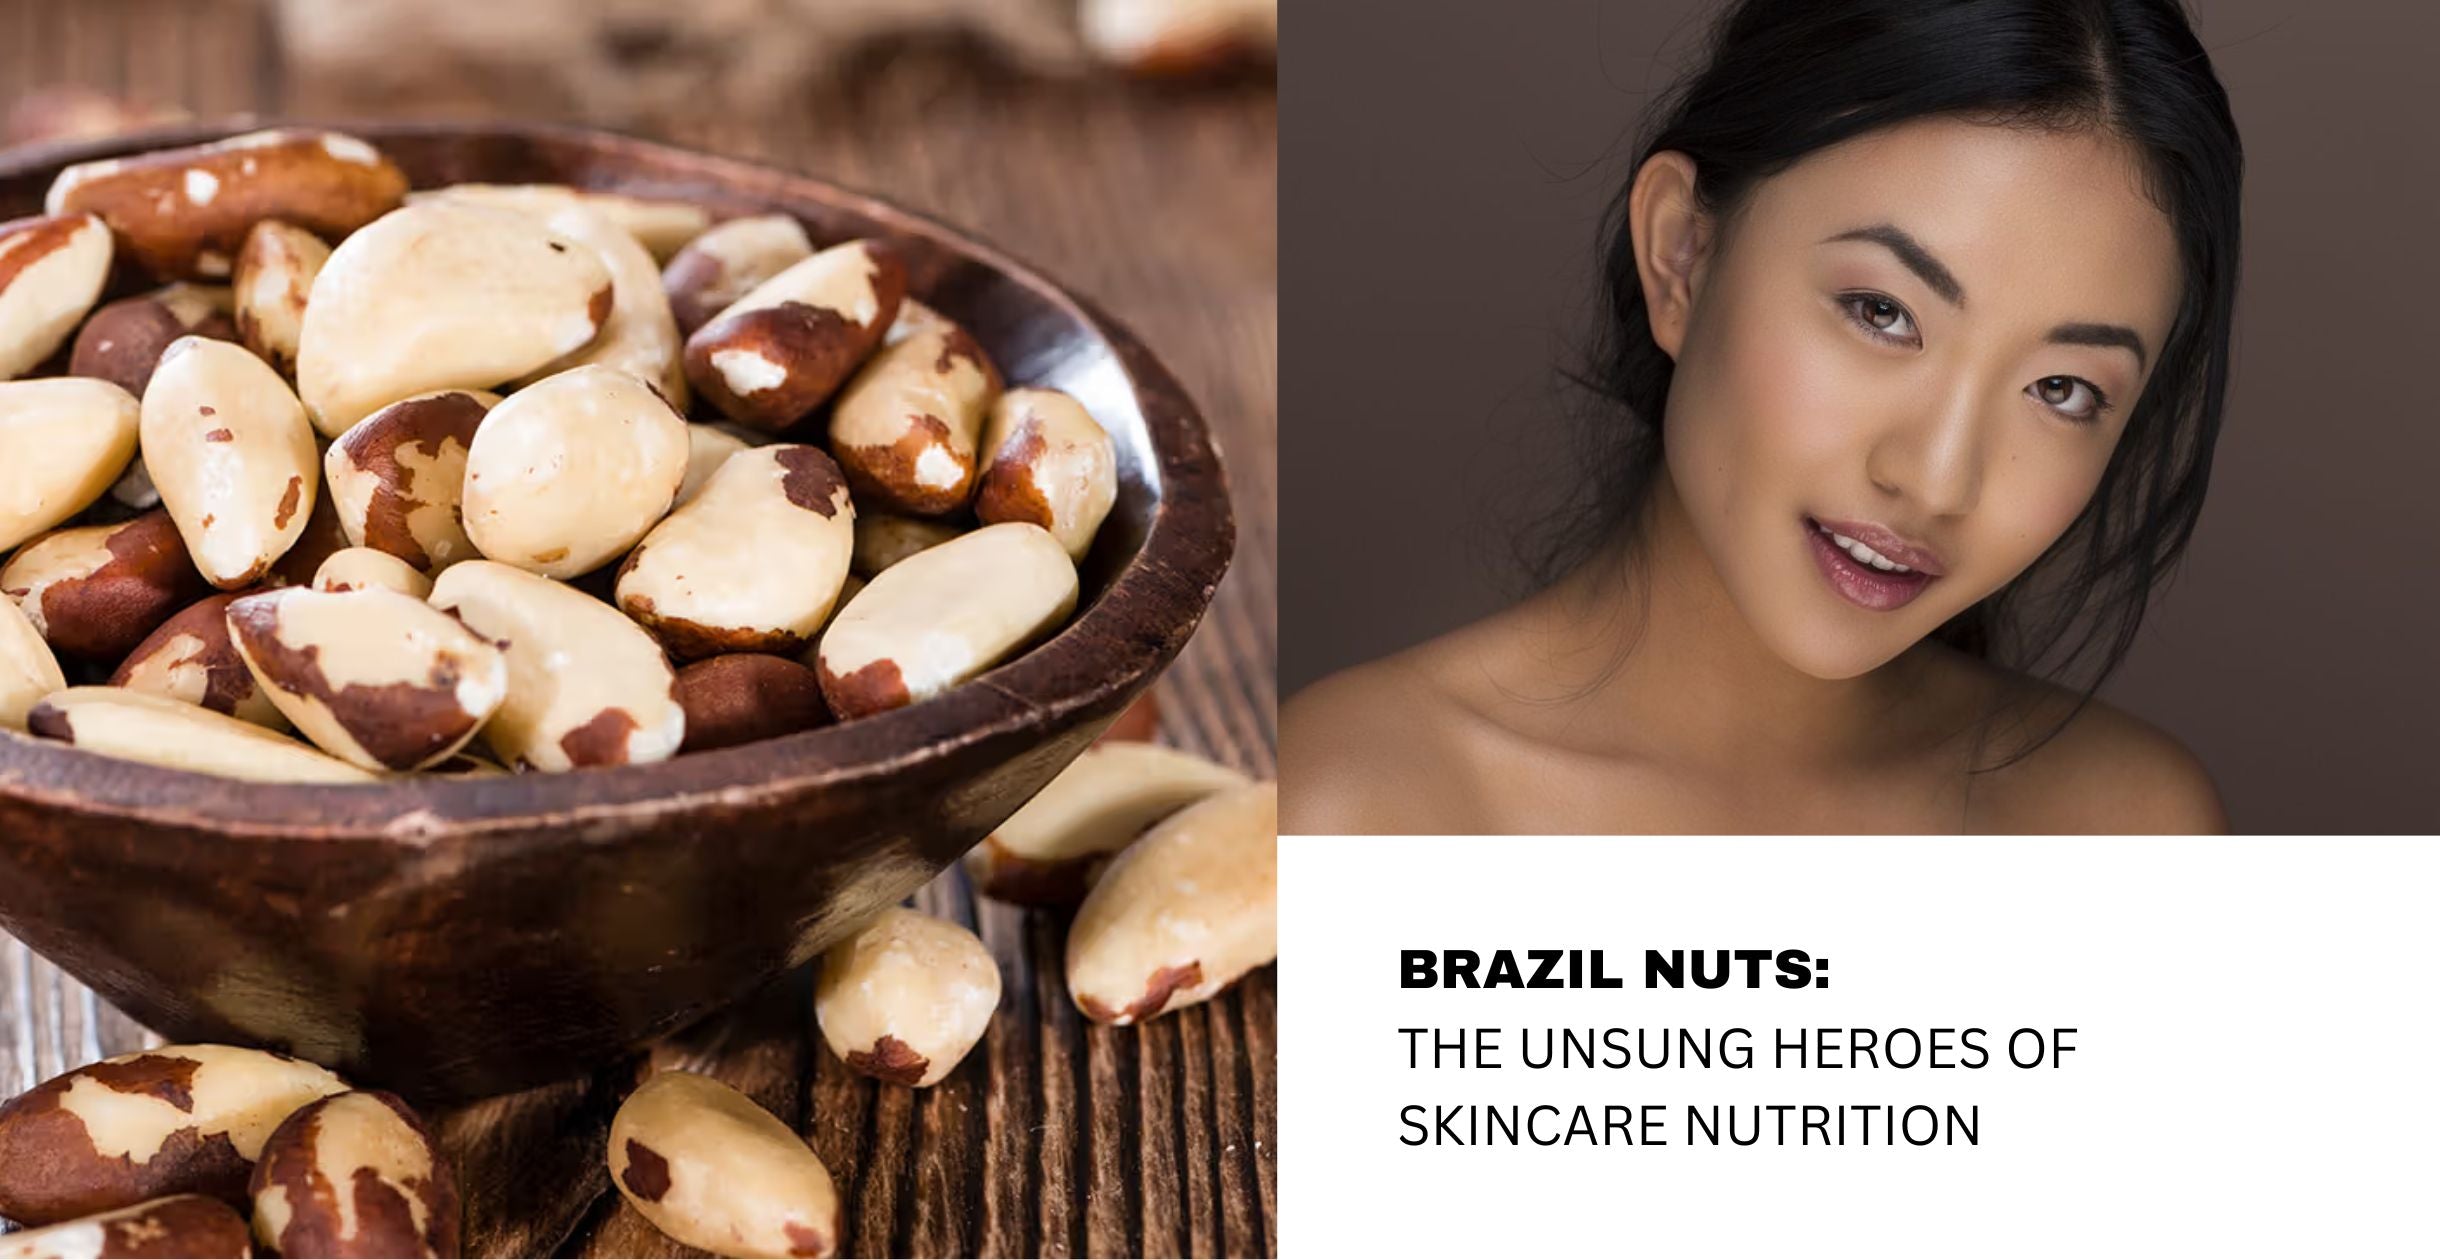 Brazil Nuts: The Unsung Heroes of Skincare Nutrition